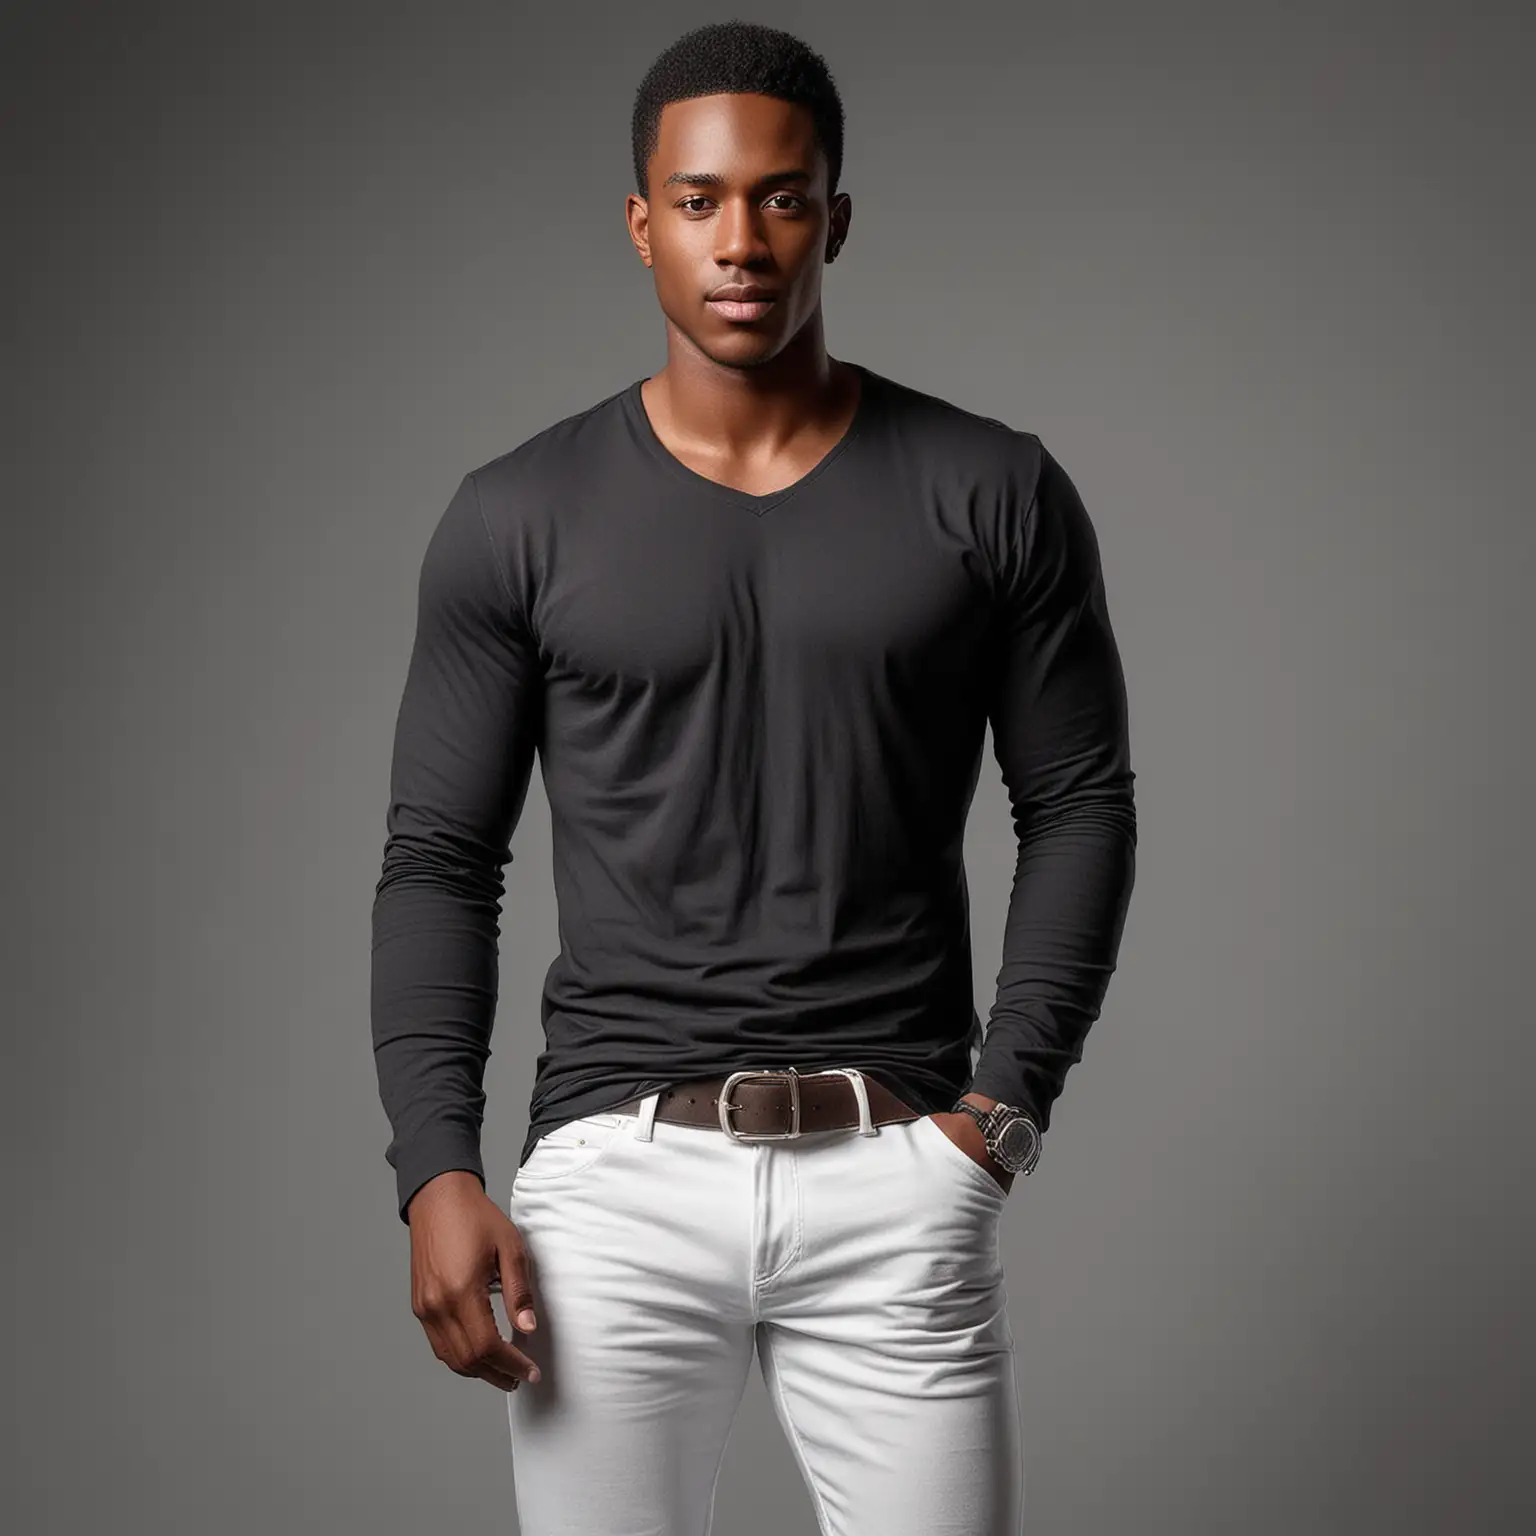 Handsome Bahamian Male Model in White Pants and Black Long Sleeve TShirt Studio Portrait